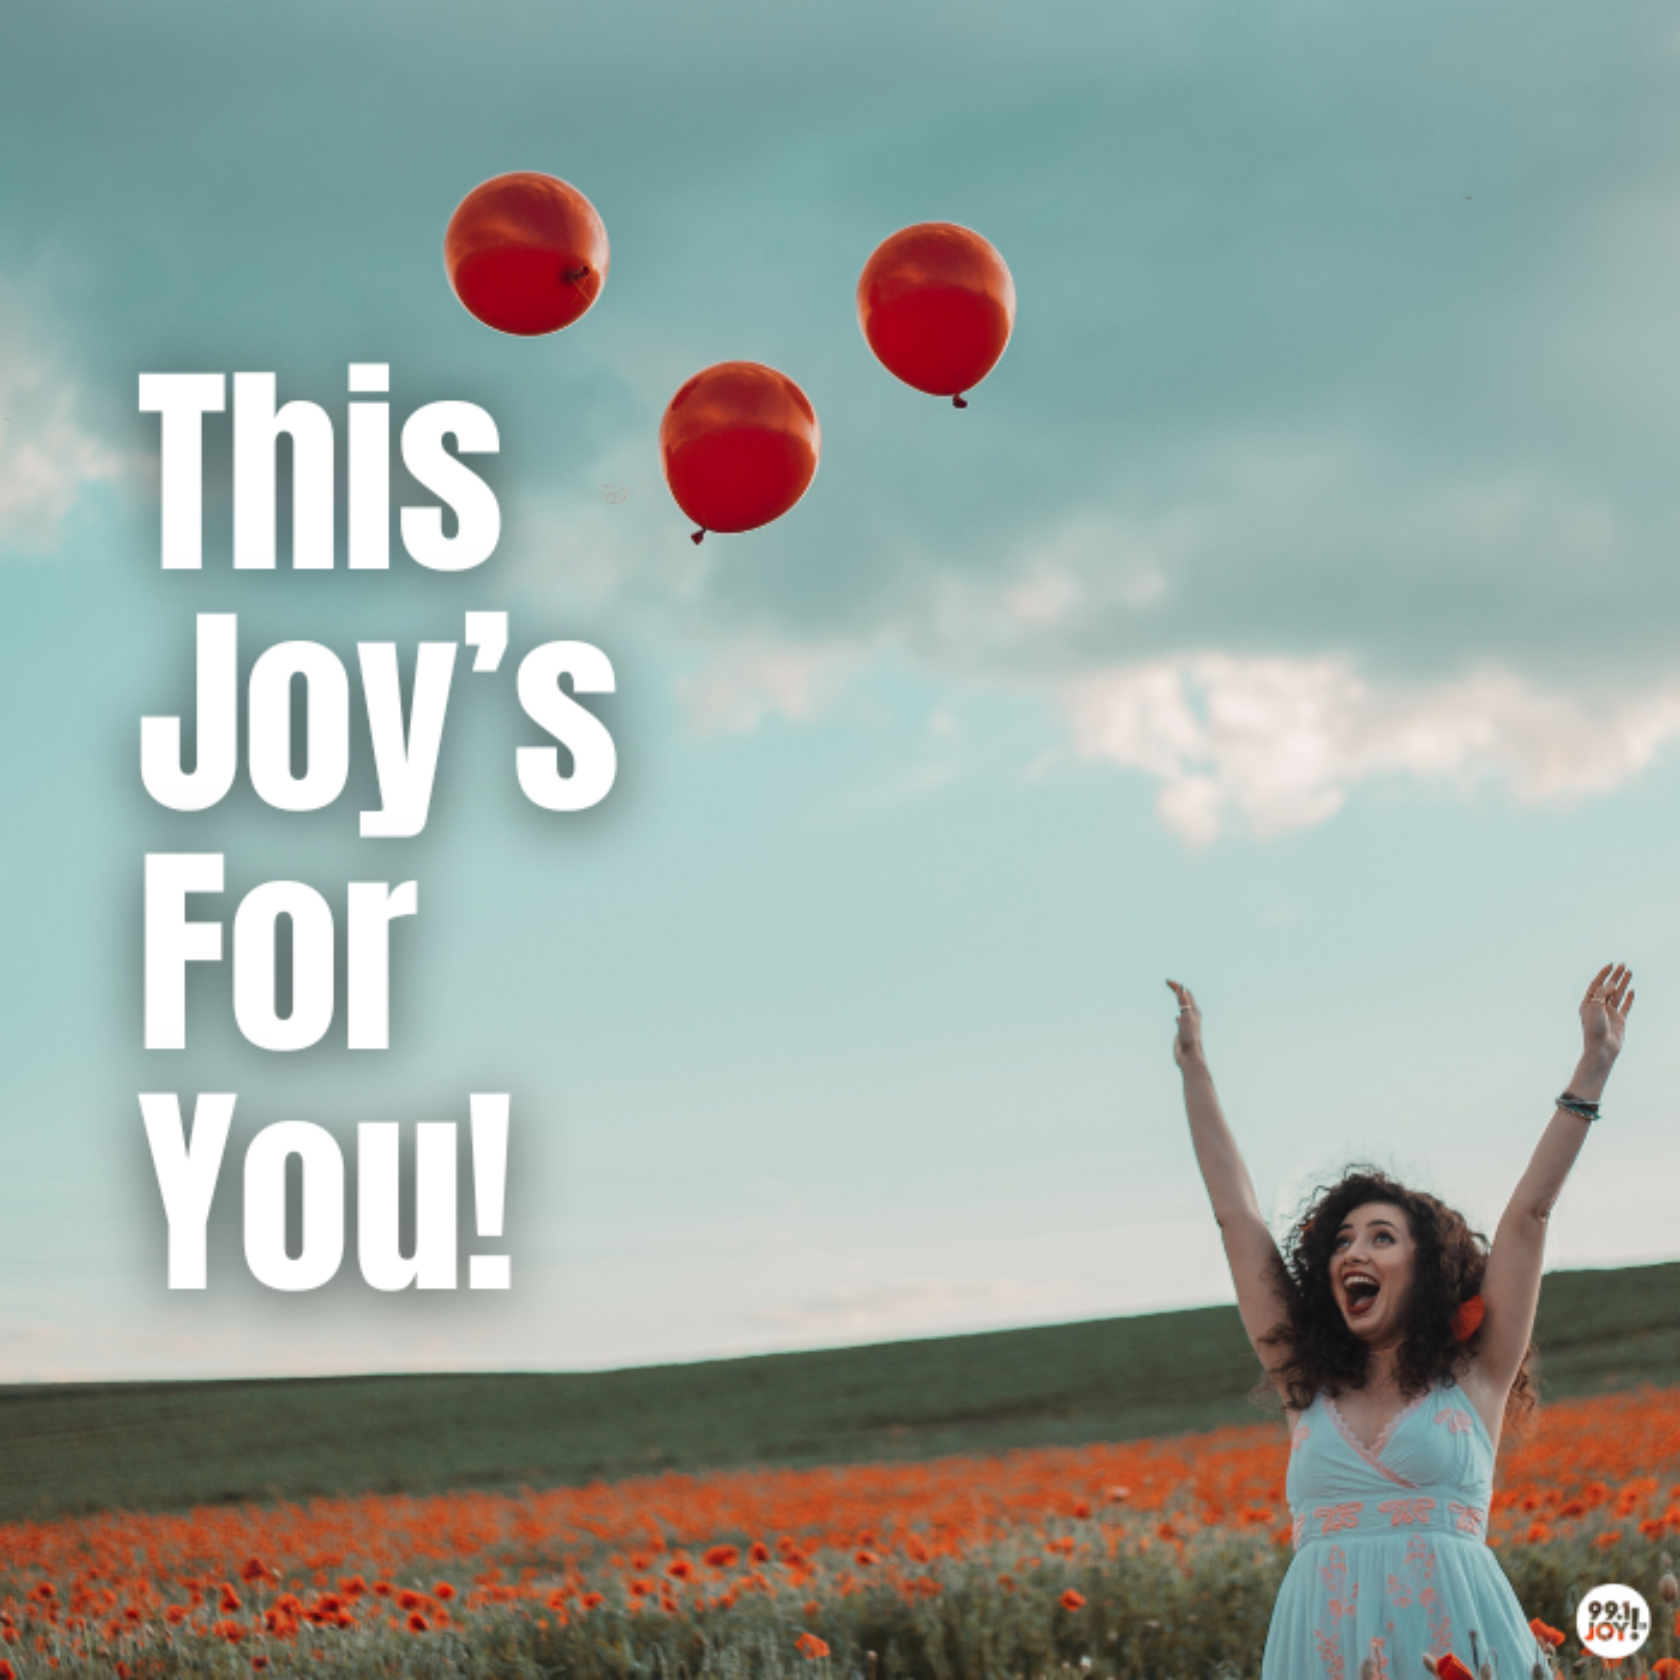 This Joy’s For You!